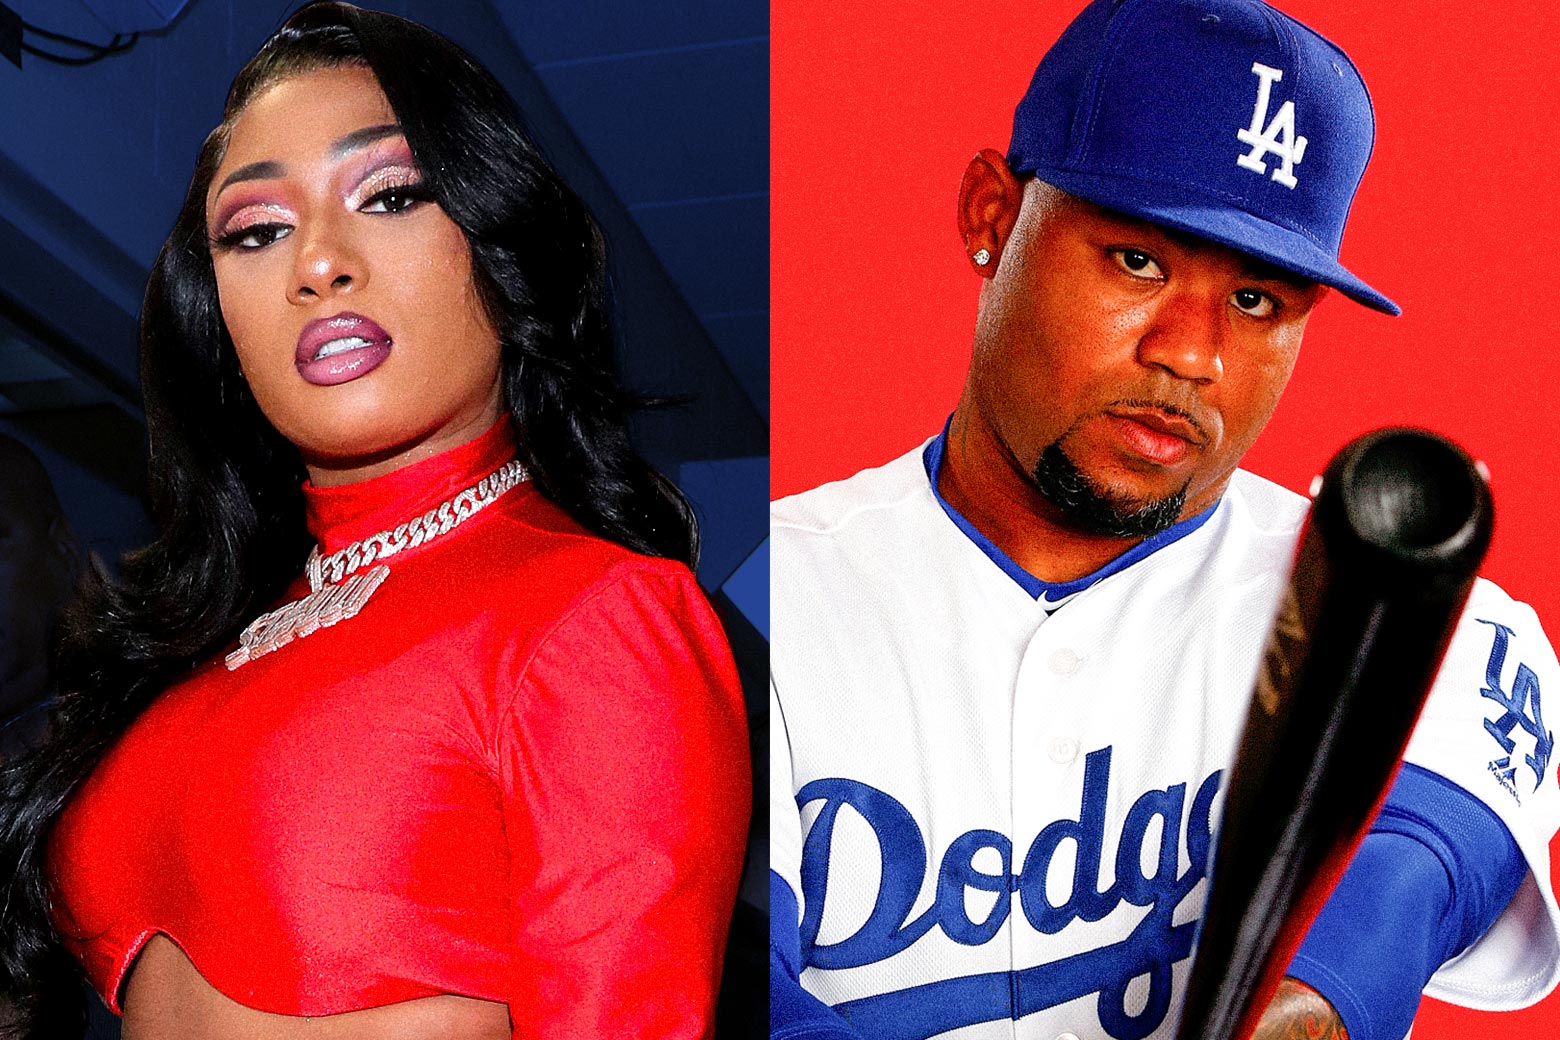 Left: Megan Thee Stallion Right: Carl Crawford in his playing days with the Dodgers holding a bat and looking at the camera